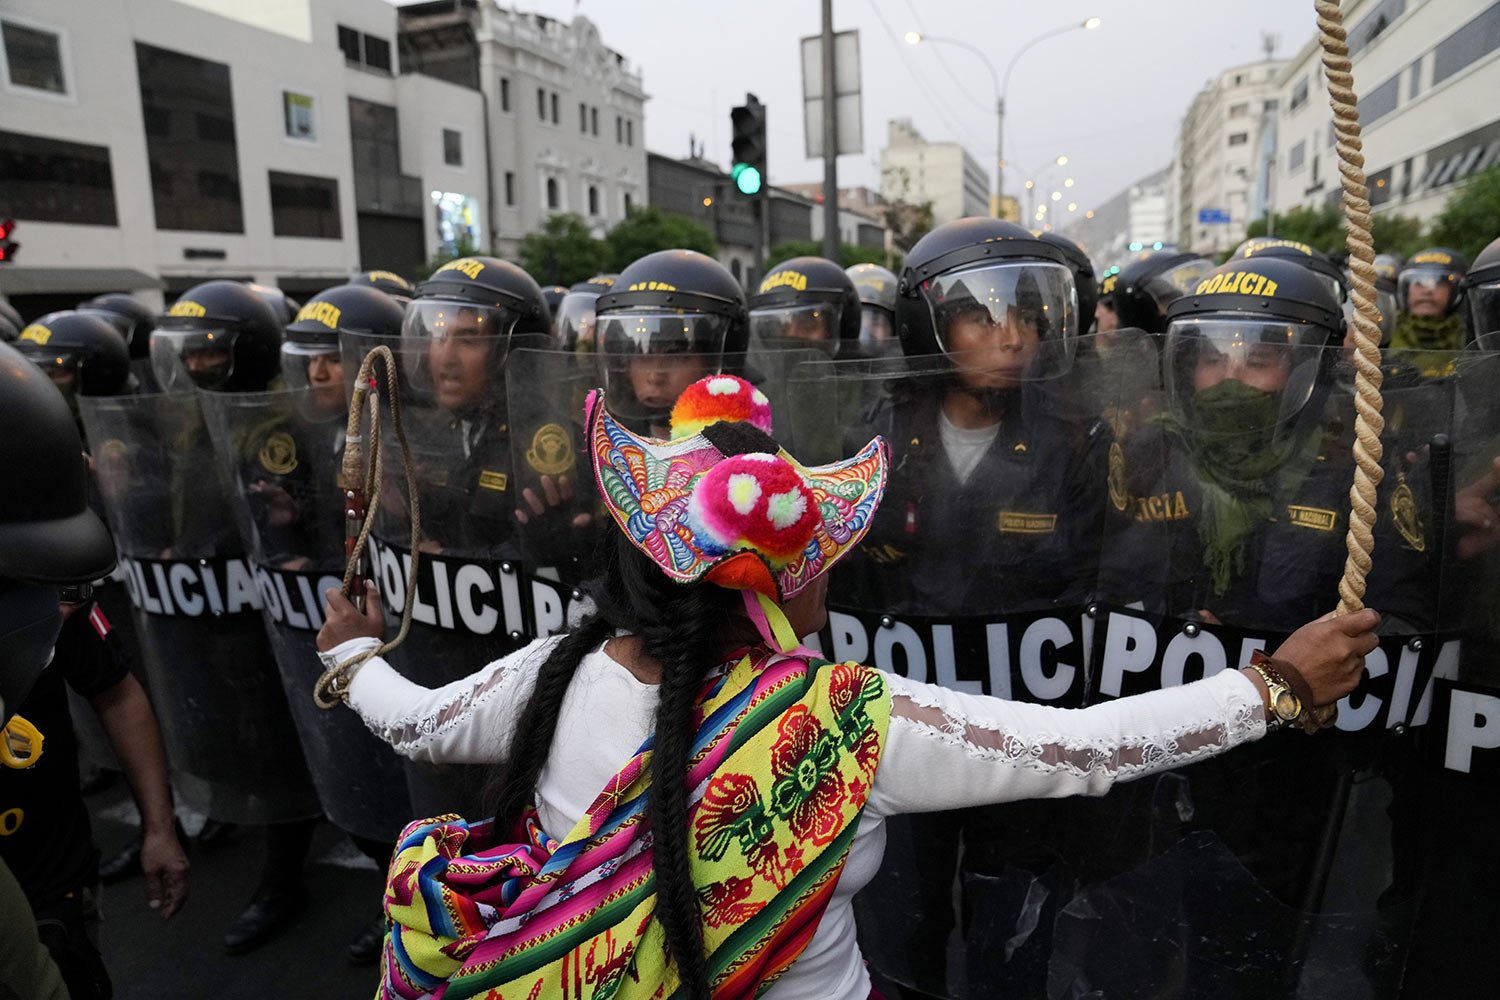  An anti-government protester challenges the police in Lima, Peru, Thursday, Feb. 9, 2023. Protesters seek immediate elections, the resignation of President Dina Boluarte, the release of President Pedro Castillo who was ousted and arrested for trying